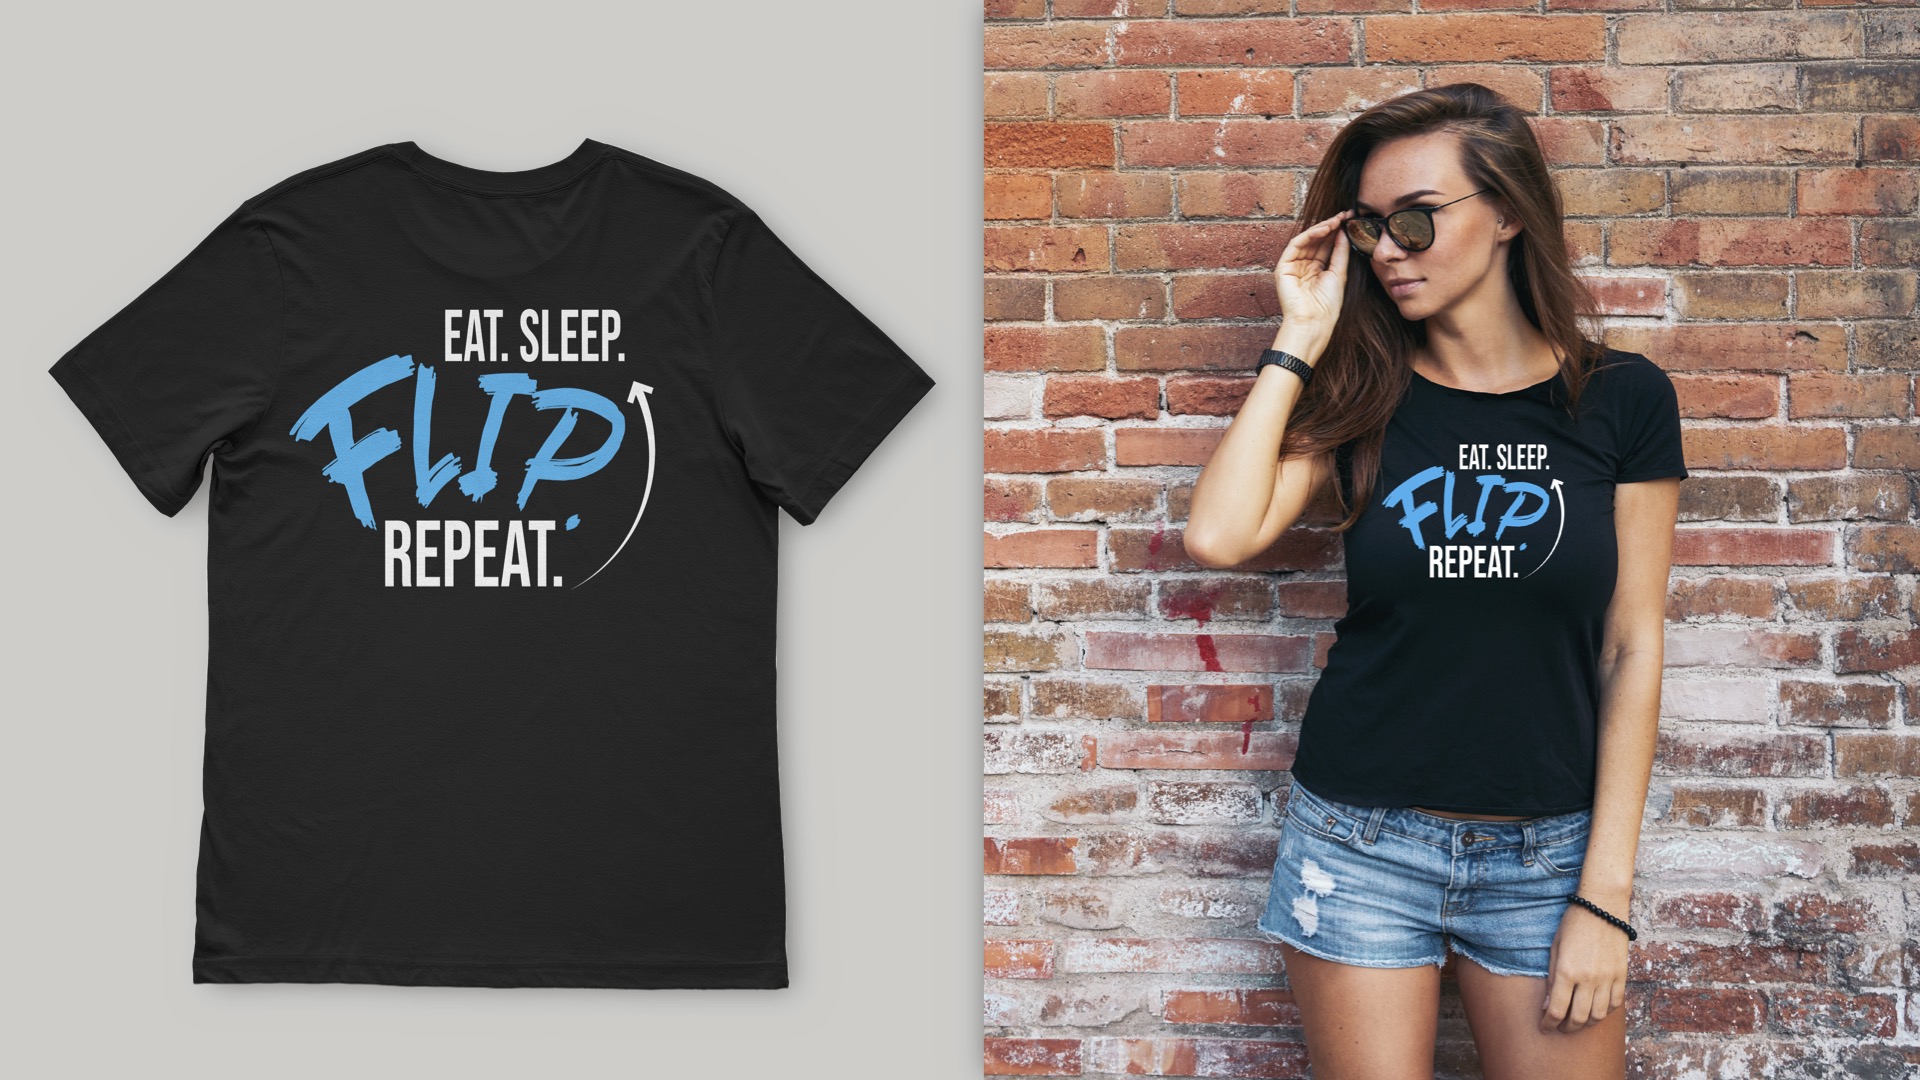  / “Eat, Sleep, Flip, Repeat,” t-shirt design, product, 2022. This t-shirt was designed for Inside Gymnastics as an apparel item for sale. 